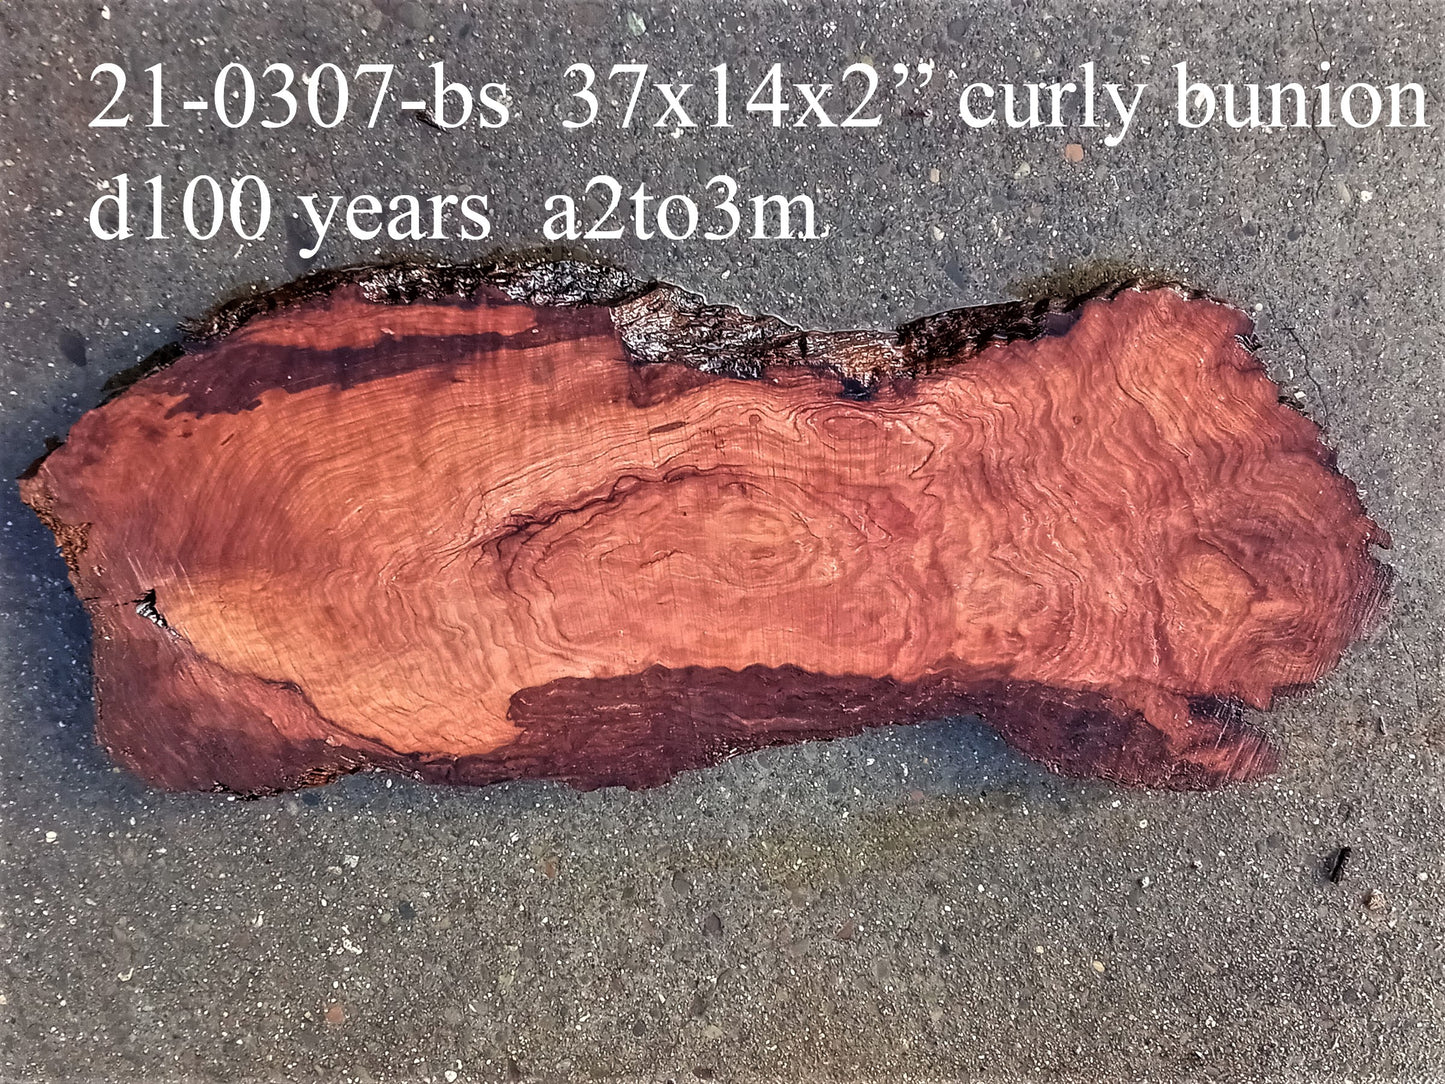 Curly bunion | Old growth redwood | live edge | DIY craft wood | 21-0307-BS